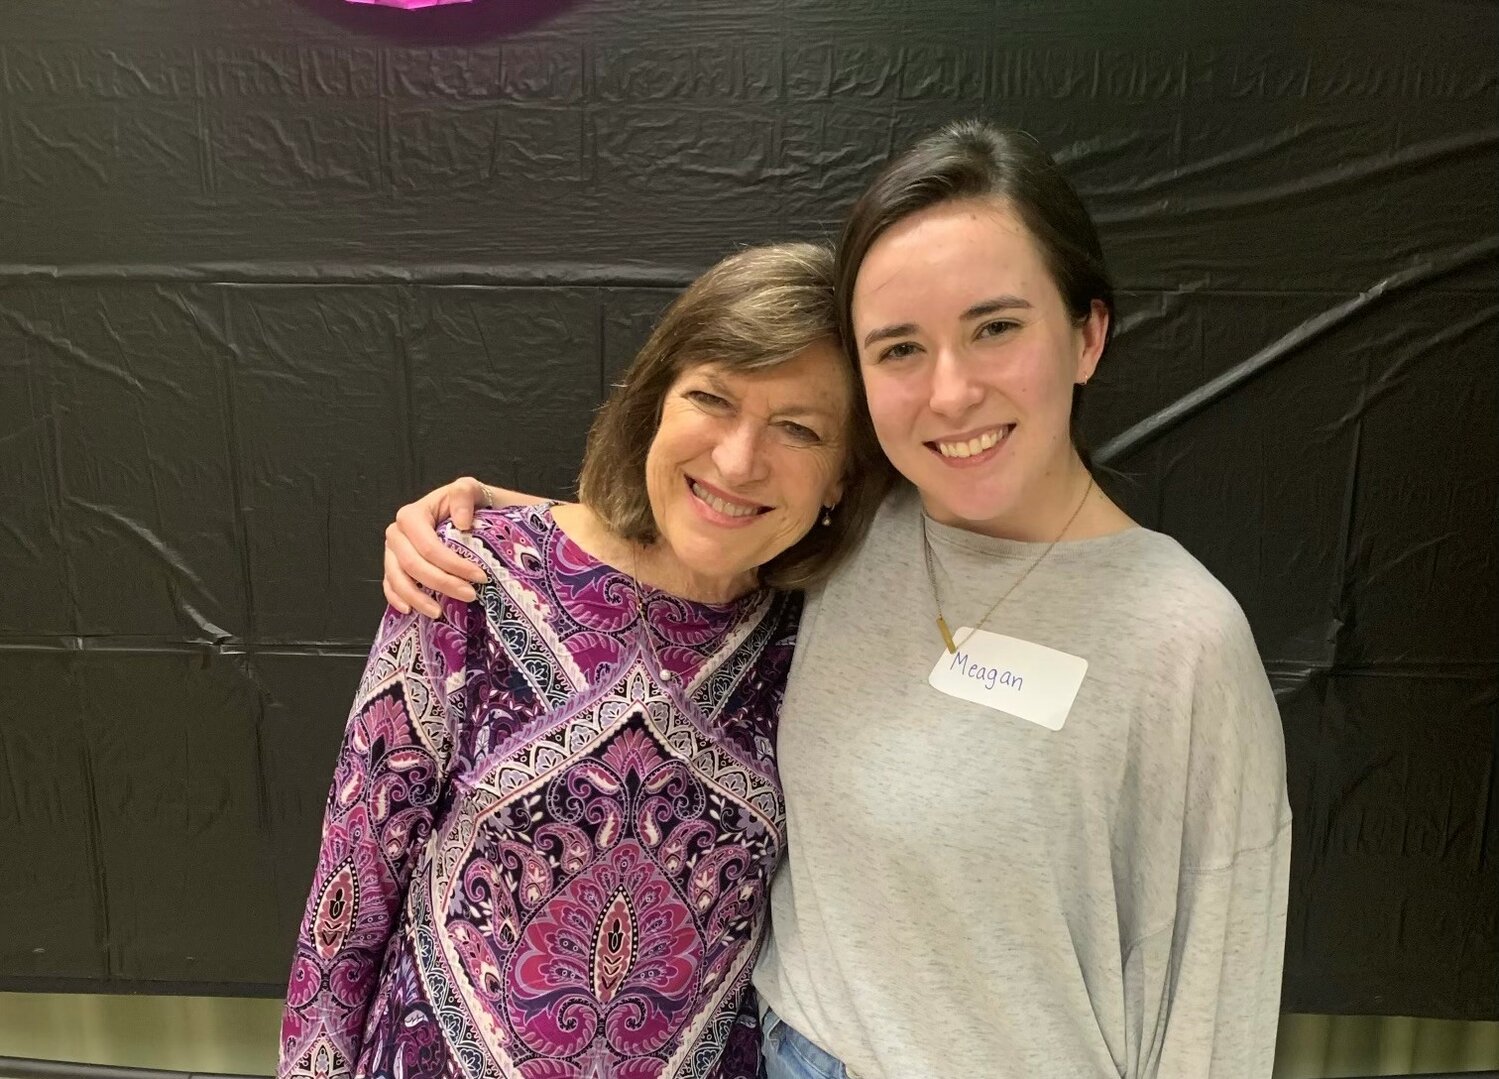 Georgia State University's legendary campus ministry director Teresa Royall poses with one of her former students, Meagan Sibley. (Photo/Baptist Collegiate Ministries)